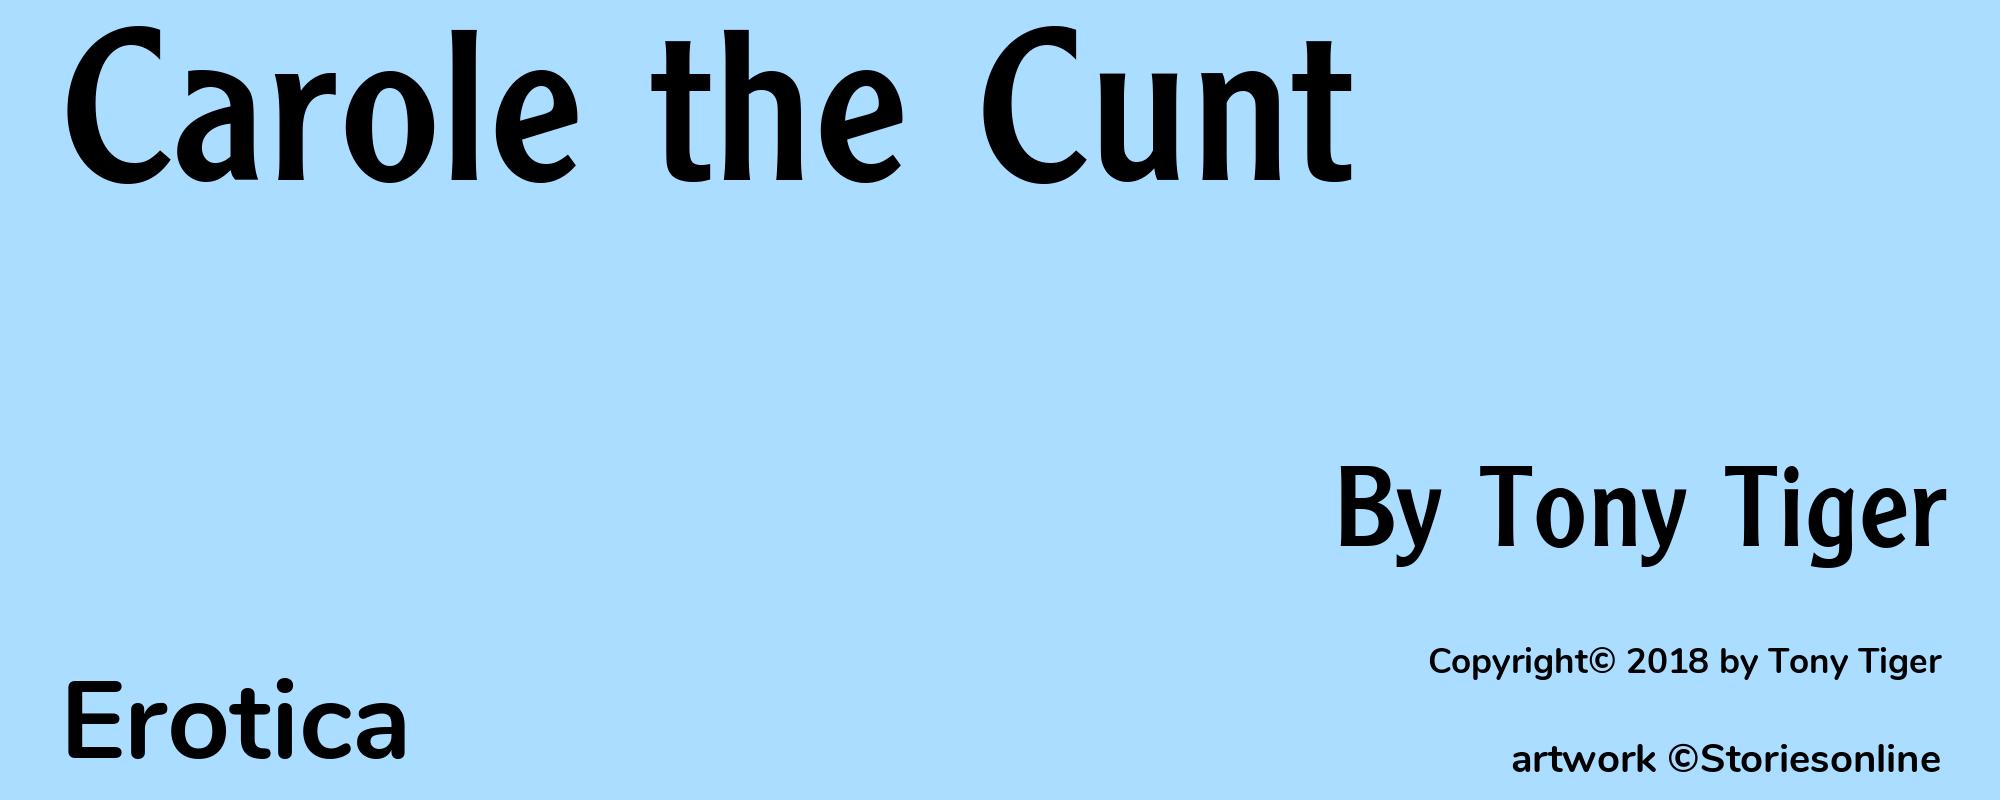 Carole the Cunt - Cover